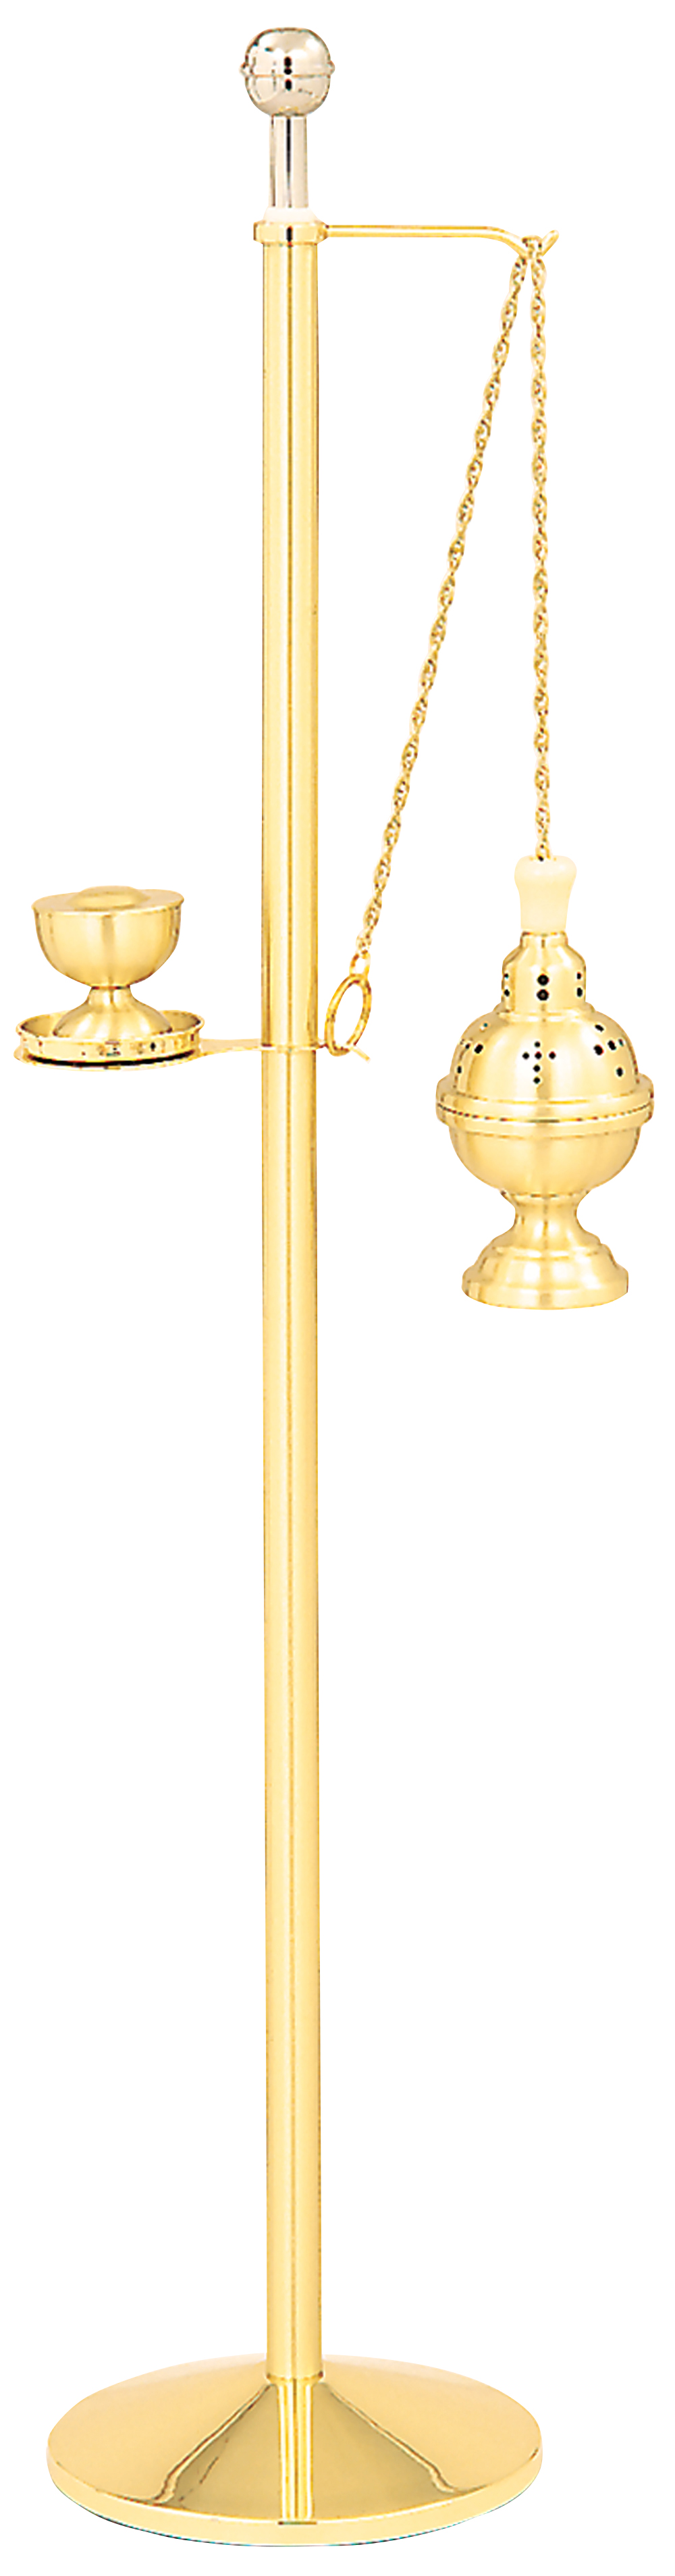 Censer Stand with Boat Shelf Brass with Holy Water Sprinkler